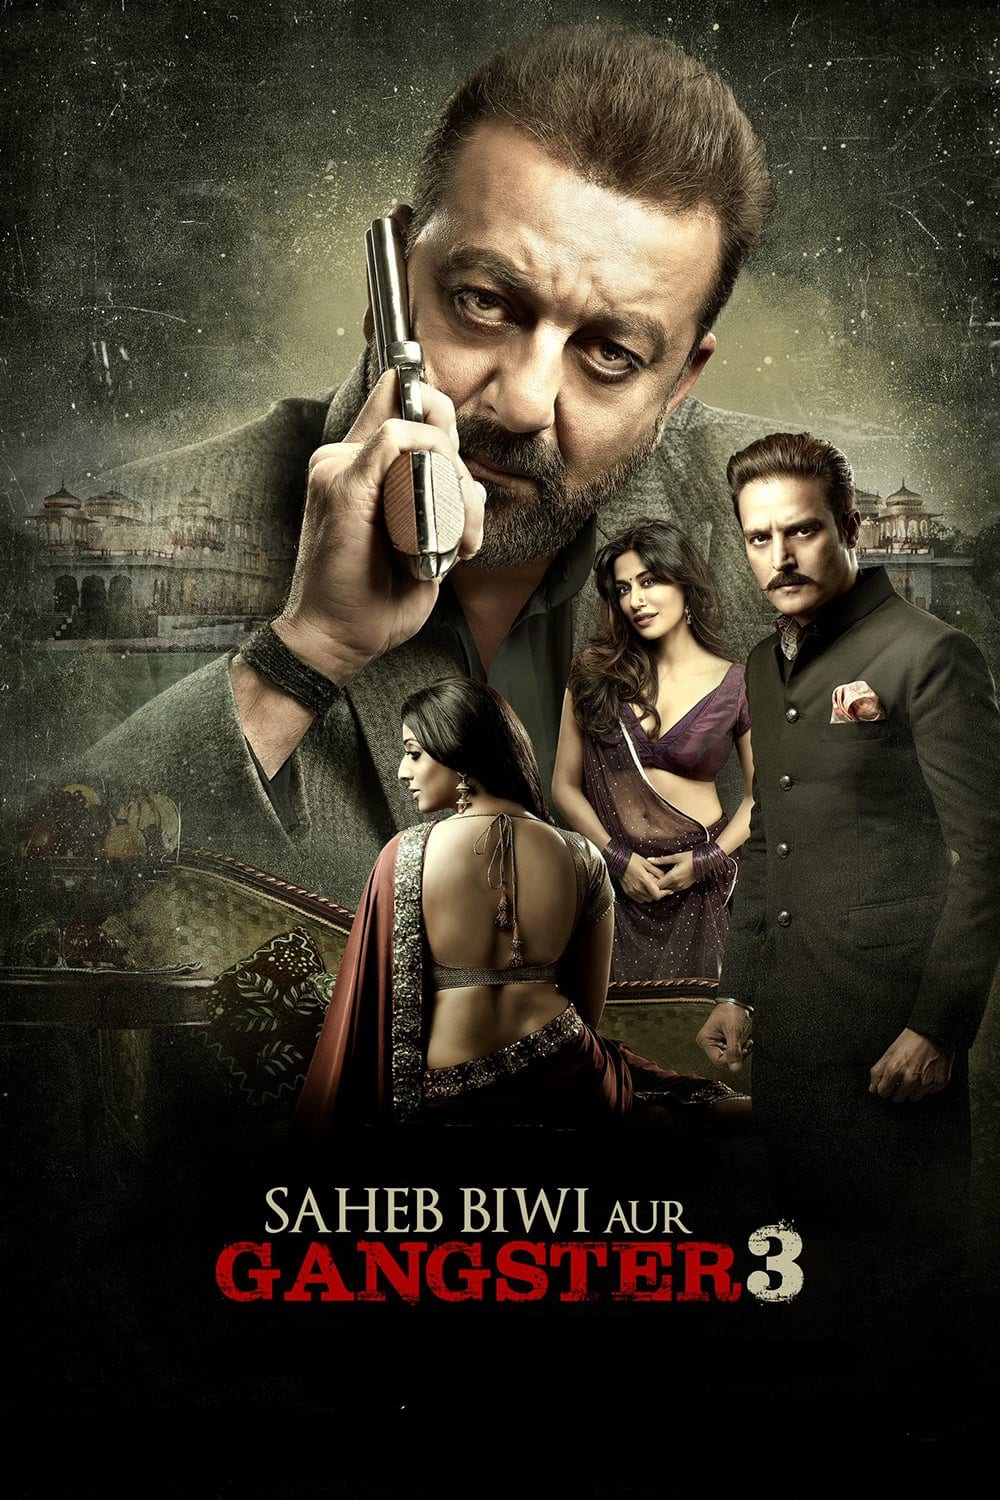 Poster for the movie "Saheb, Biwi Aur Gangster 3"